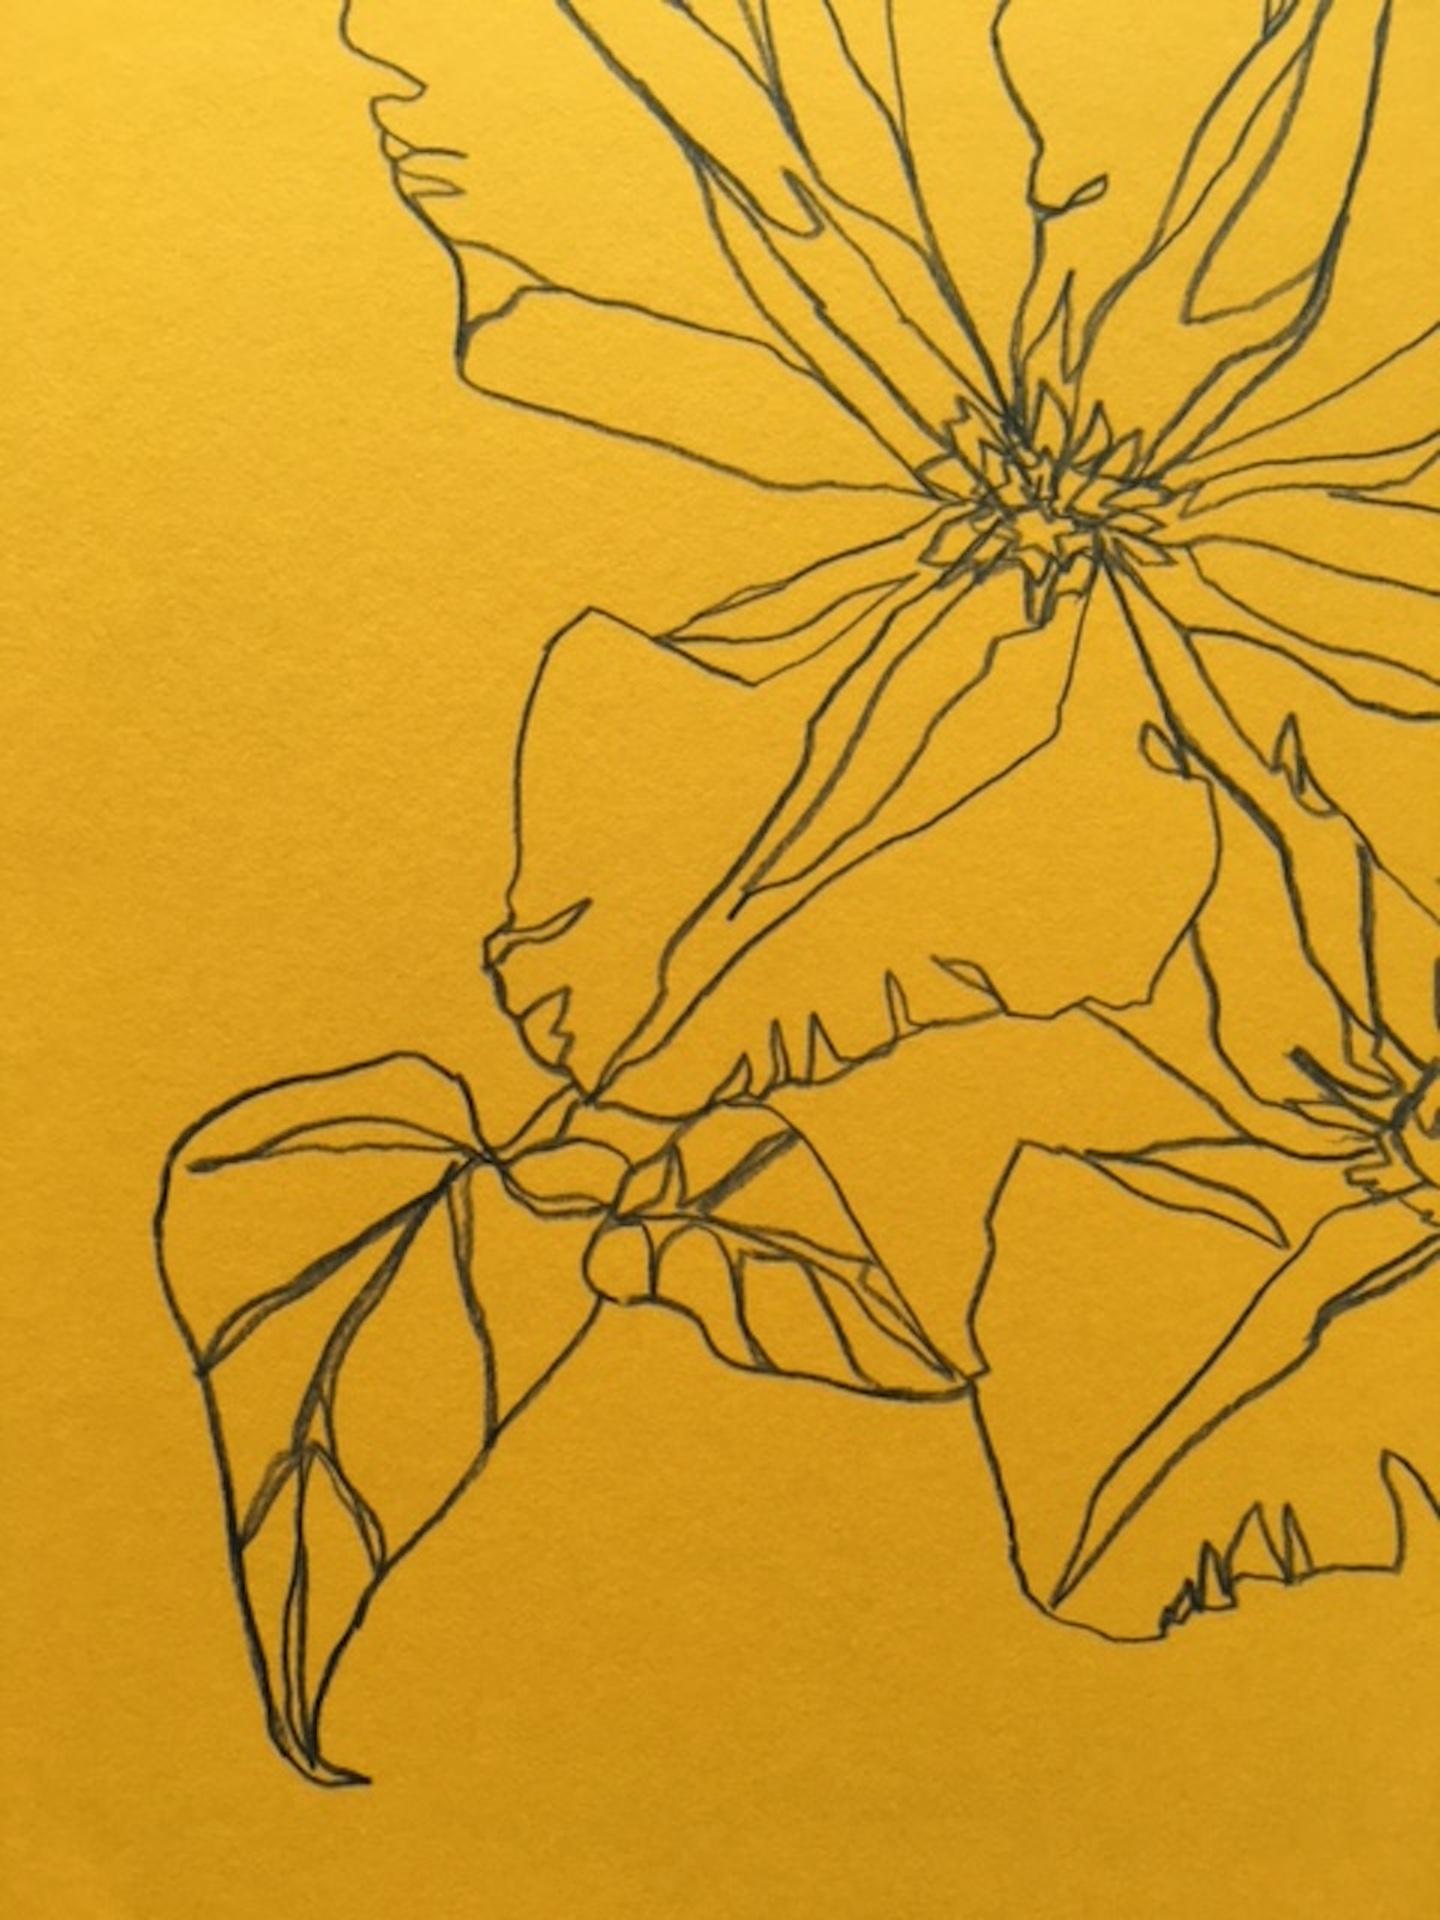 flower drawing